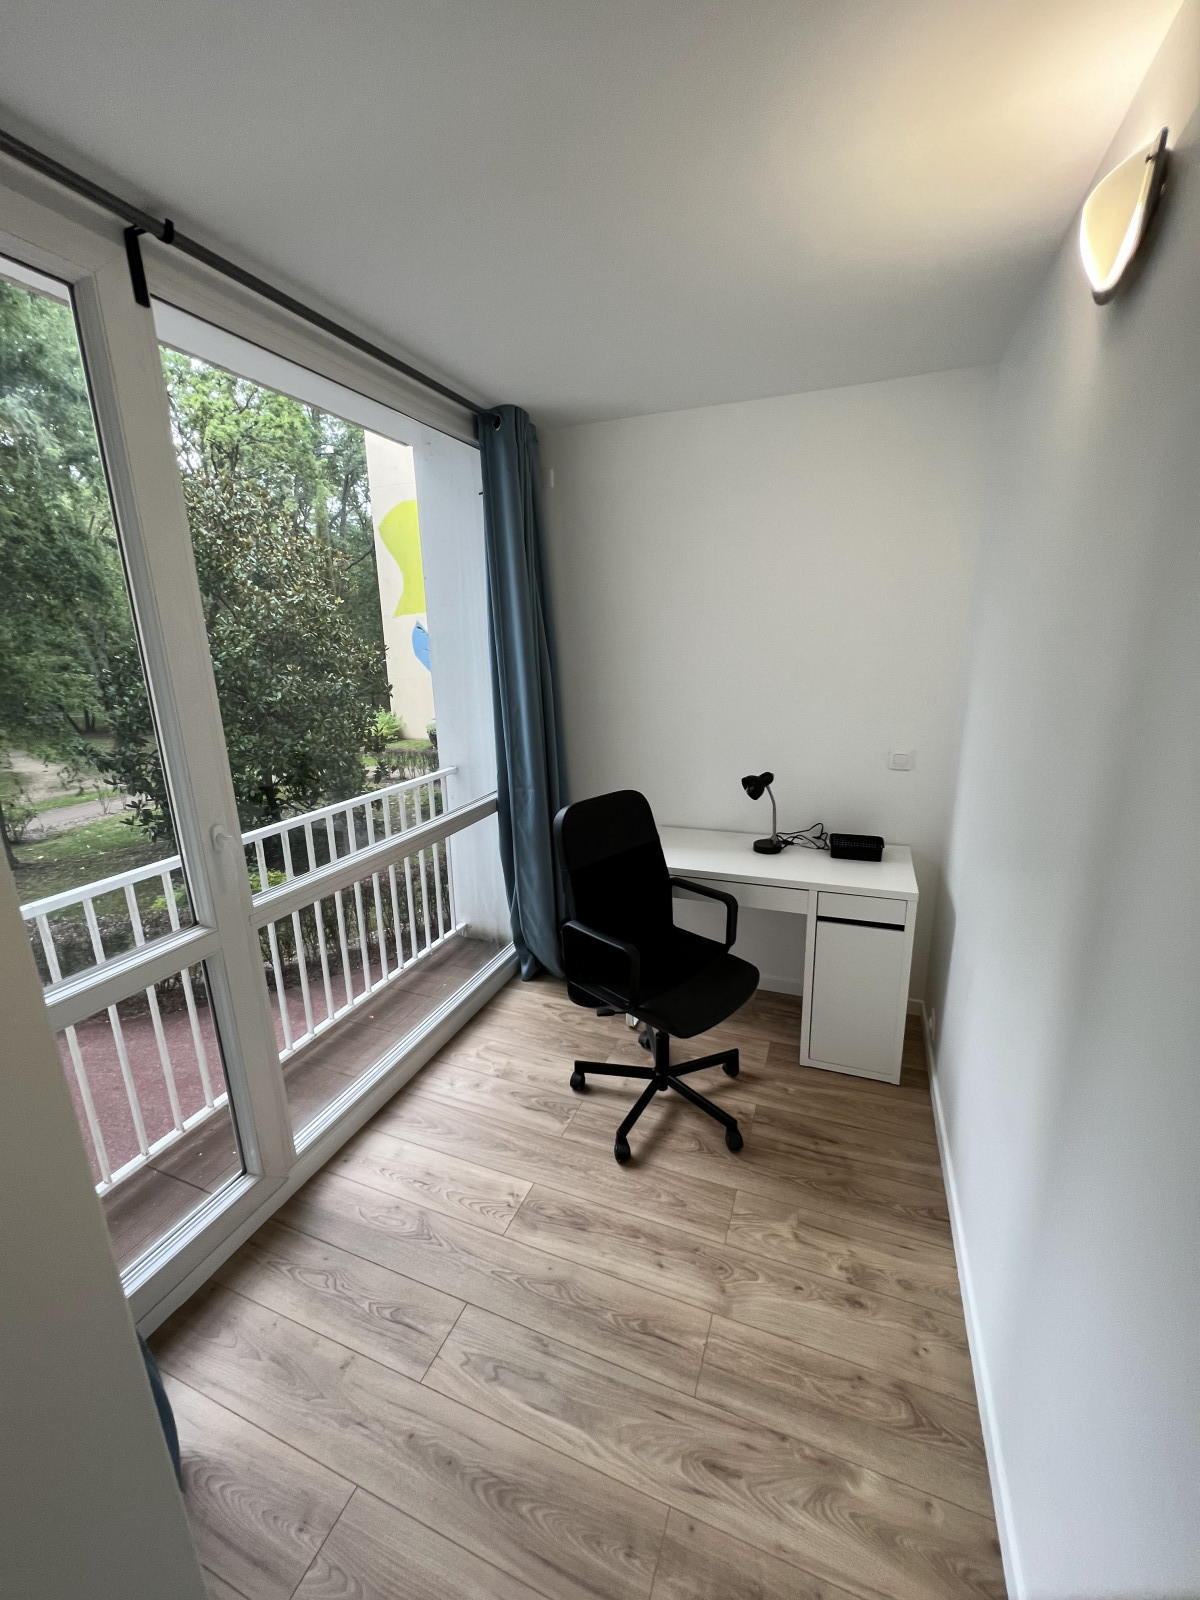 
                                                Colocation
                                                 Belle colocation Cergy